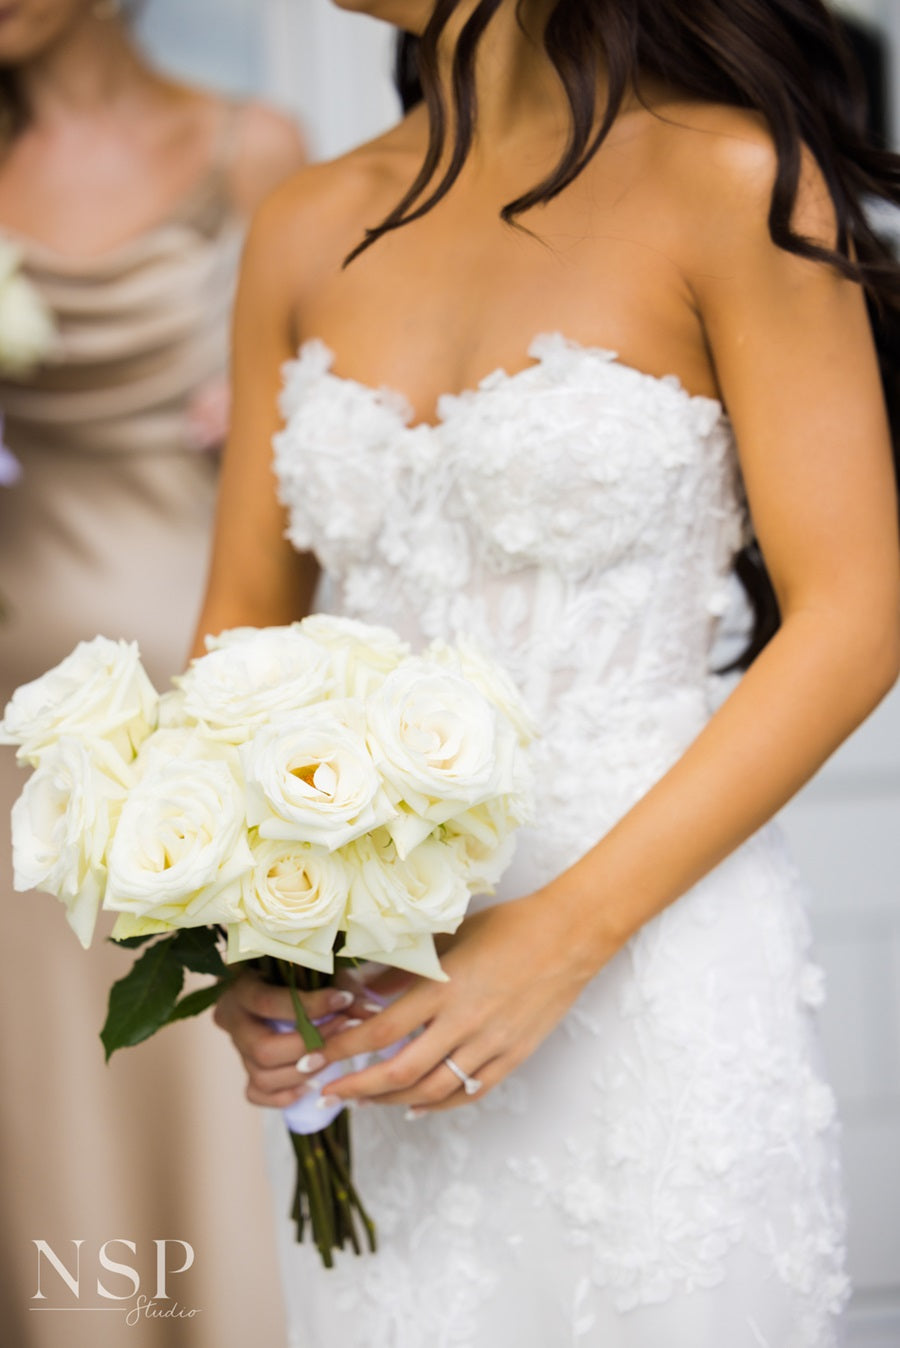 Bride holding bouquet of white roses.